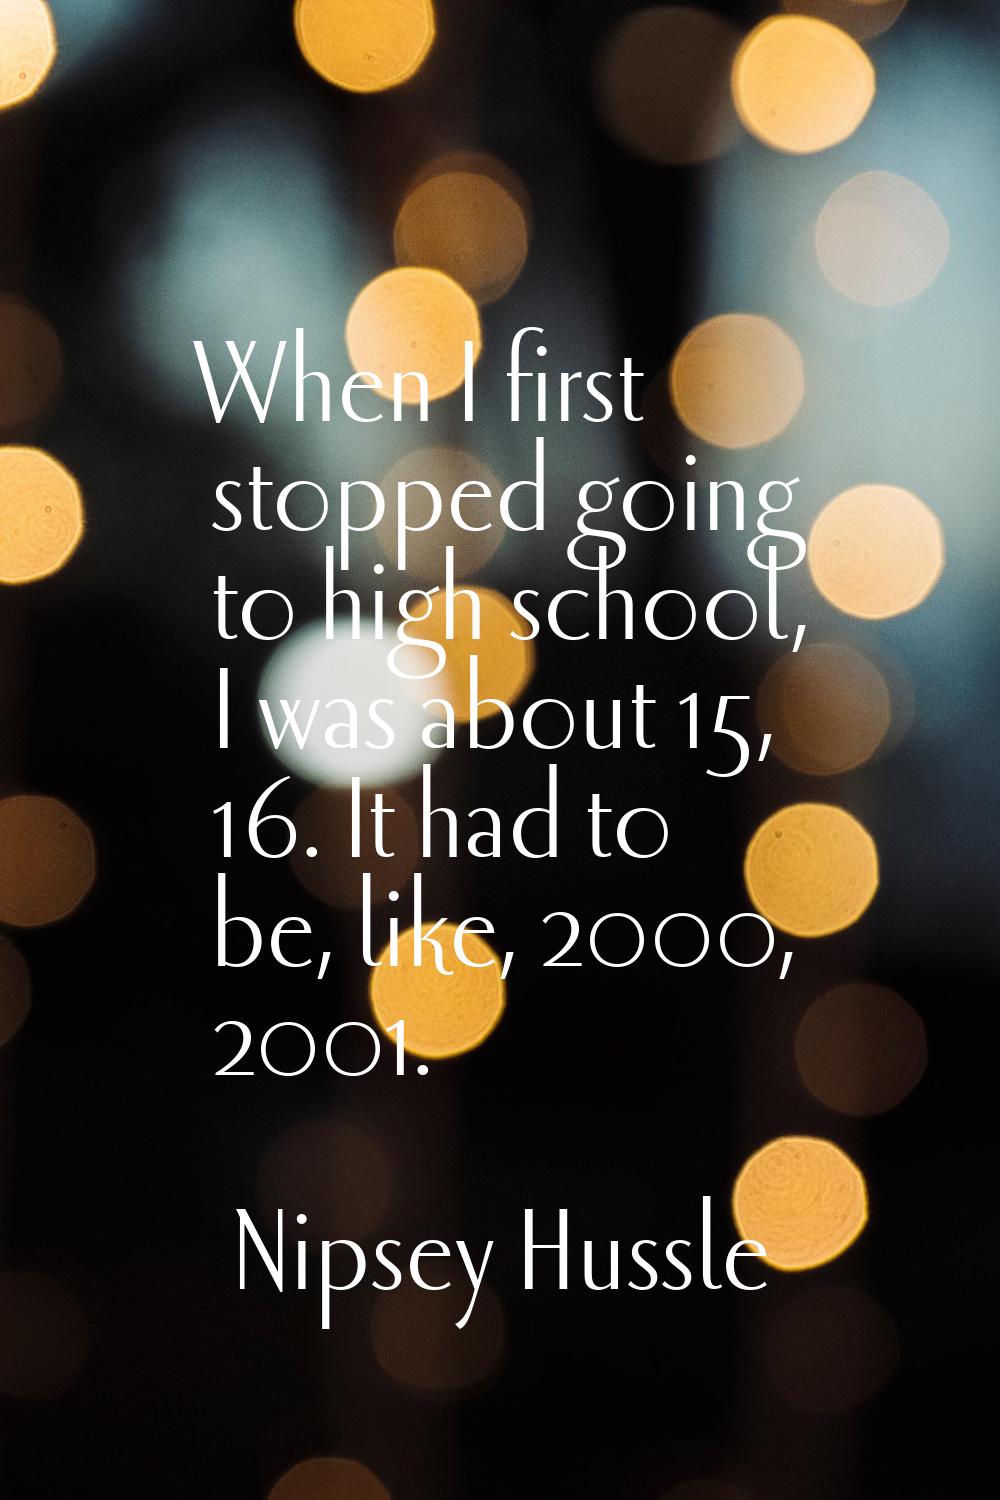 When I first stopped going to high school, I was about 15, 16. It had to be, like, 2000, 2001.